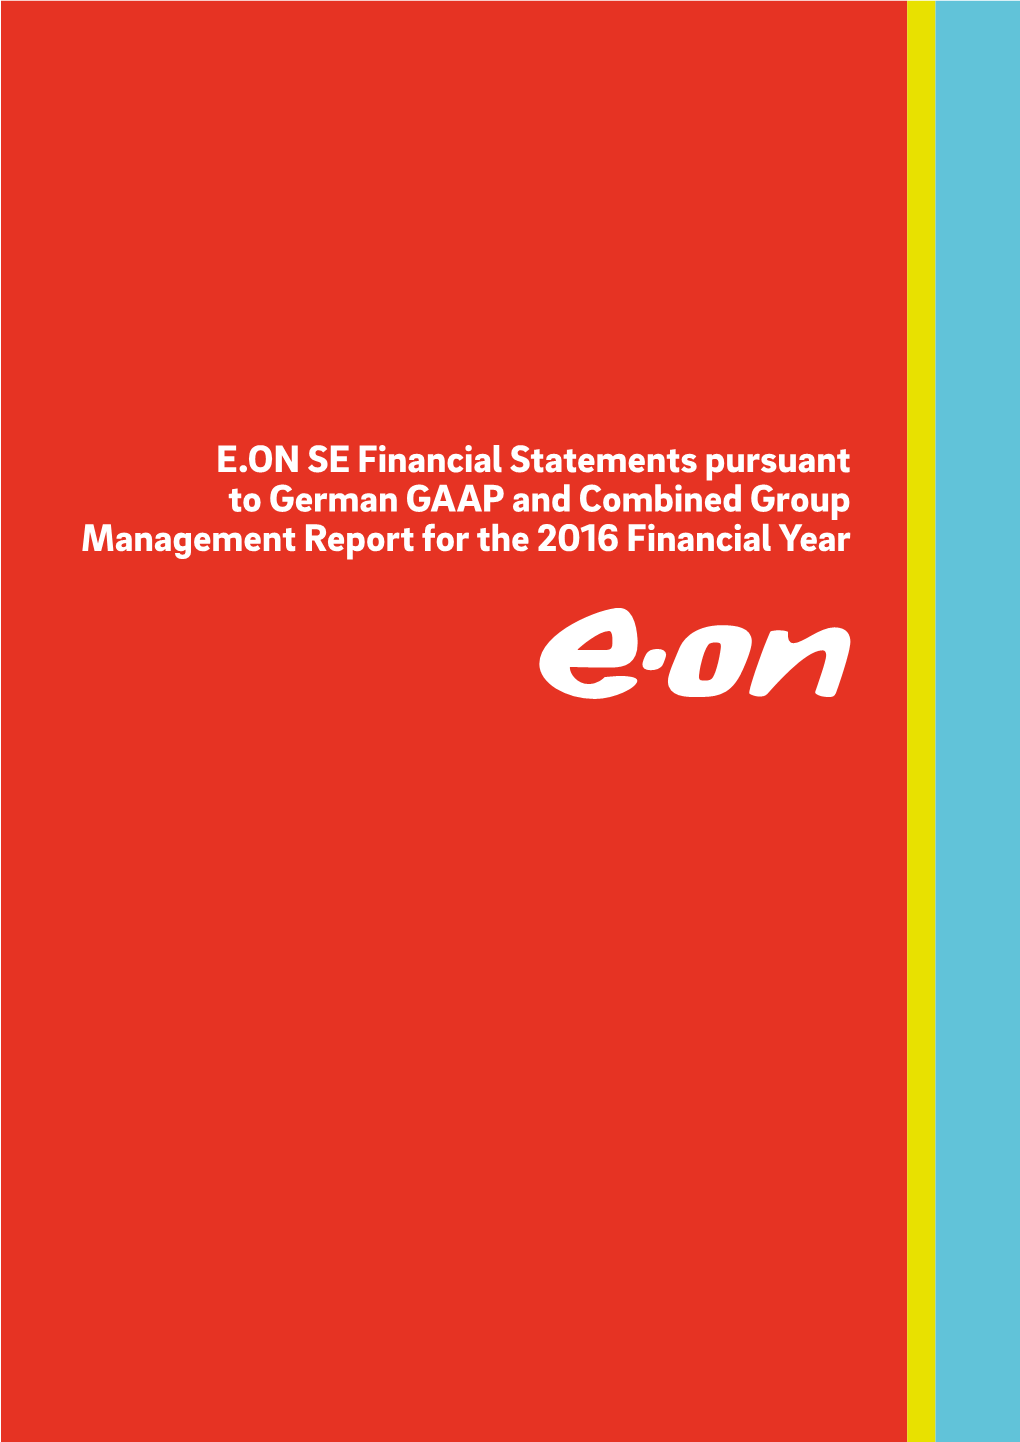 E.ON SE Financial Statements Pursuant to German GAAP